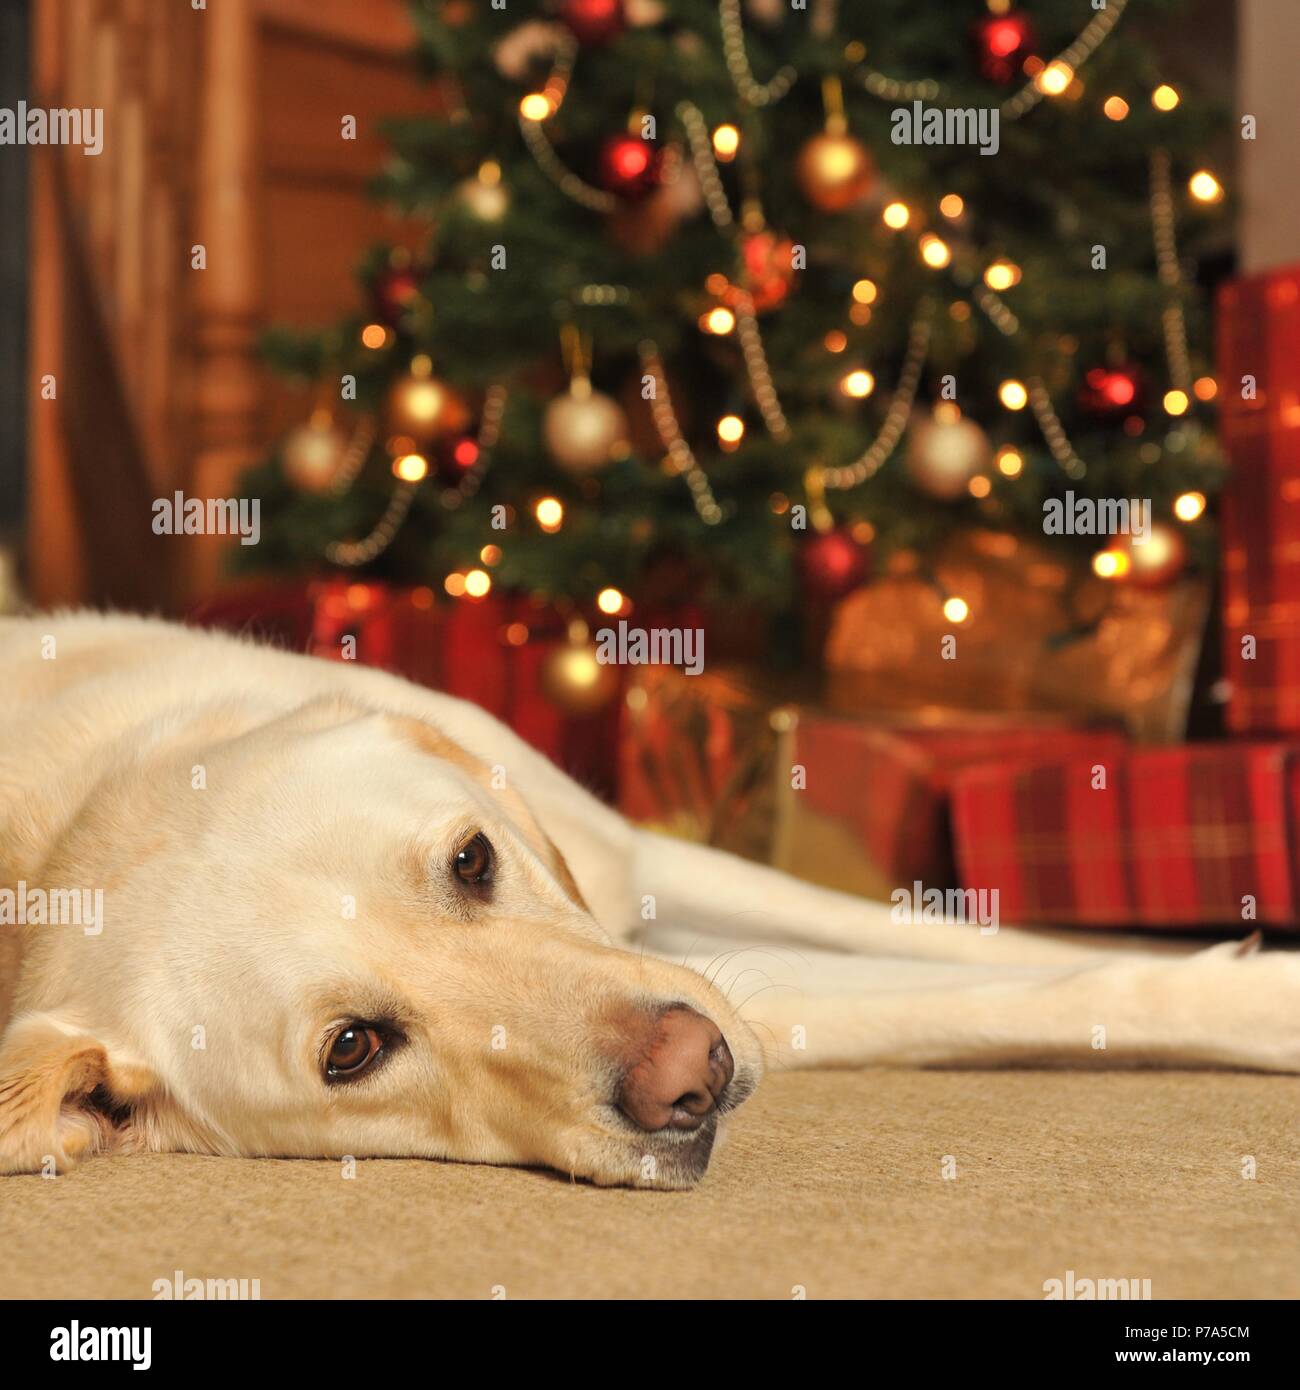 https://c8.alamy.com/comp/P7A5CM/dog-in-front-of-christmas-tree-P7A5CM.jpg